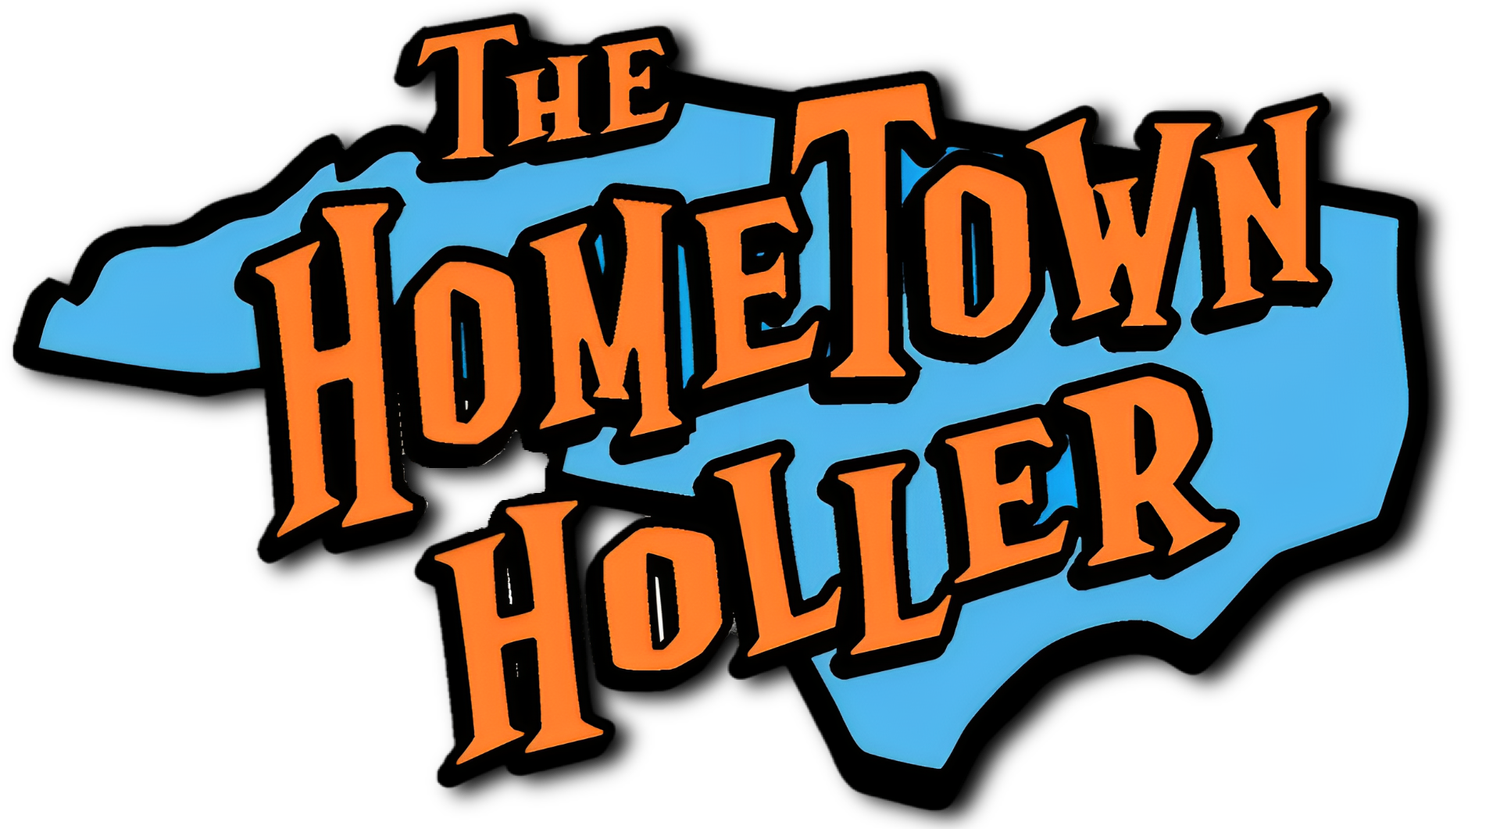 The Hometown Holler